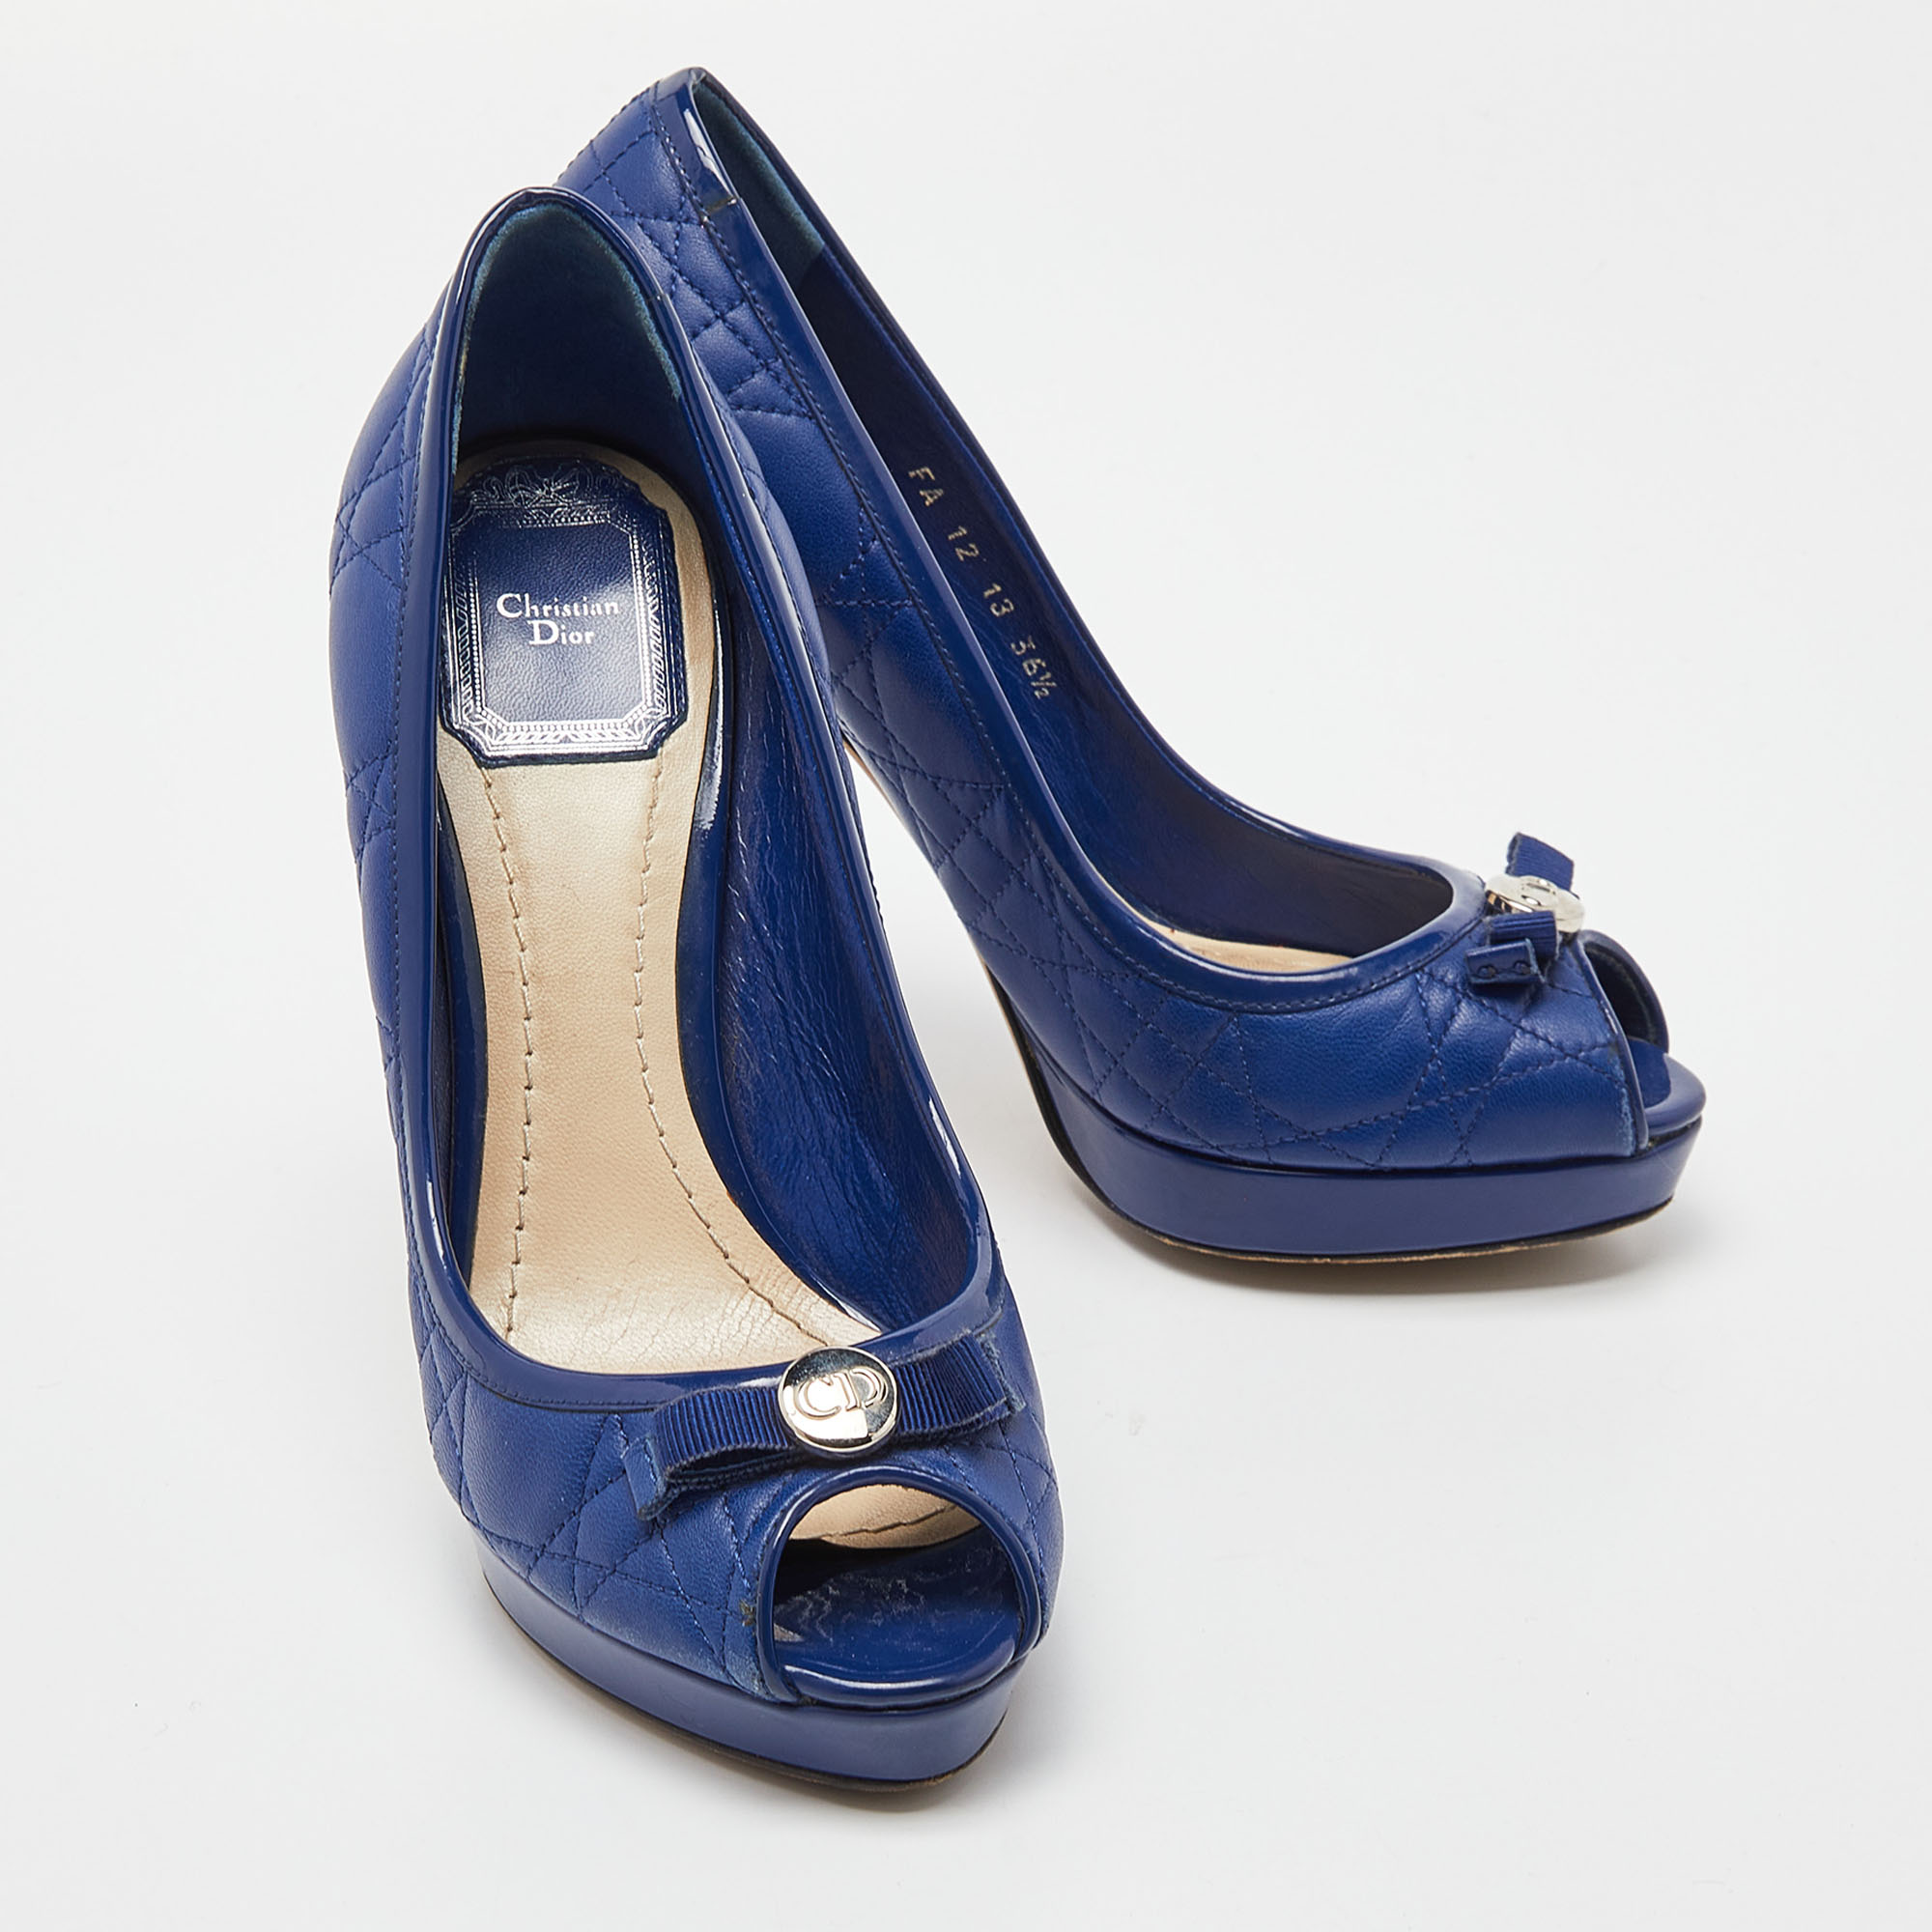 Dior Blue Cannage Leather And Patent Bow Peep Toe Platform Pumps Size 36.5